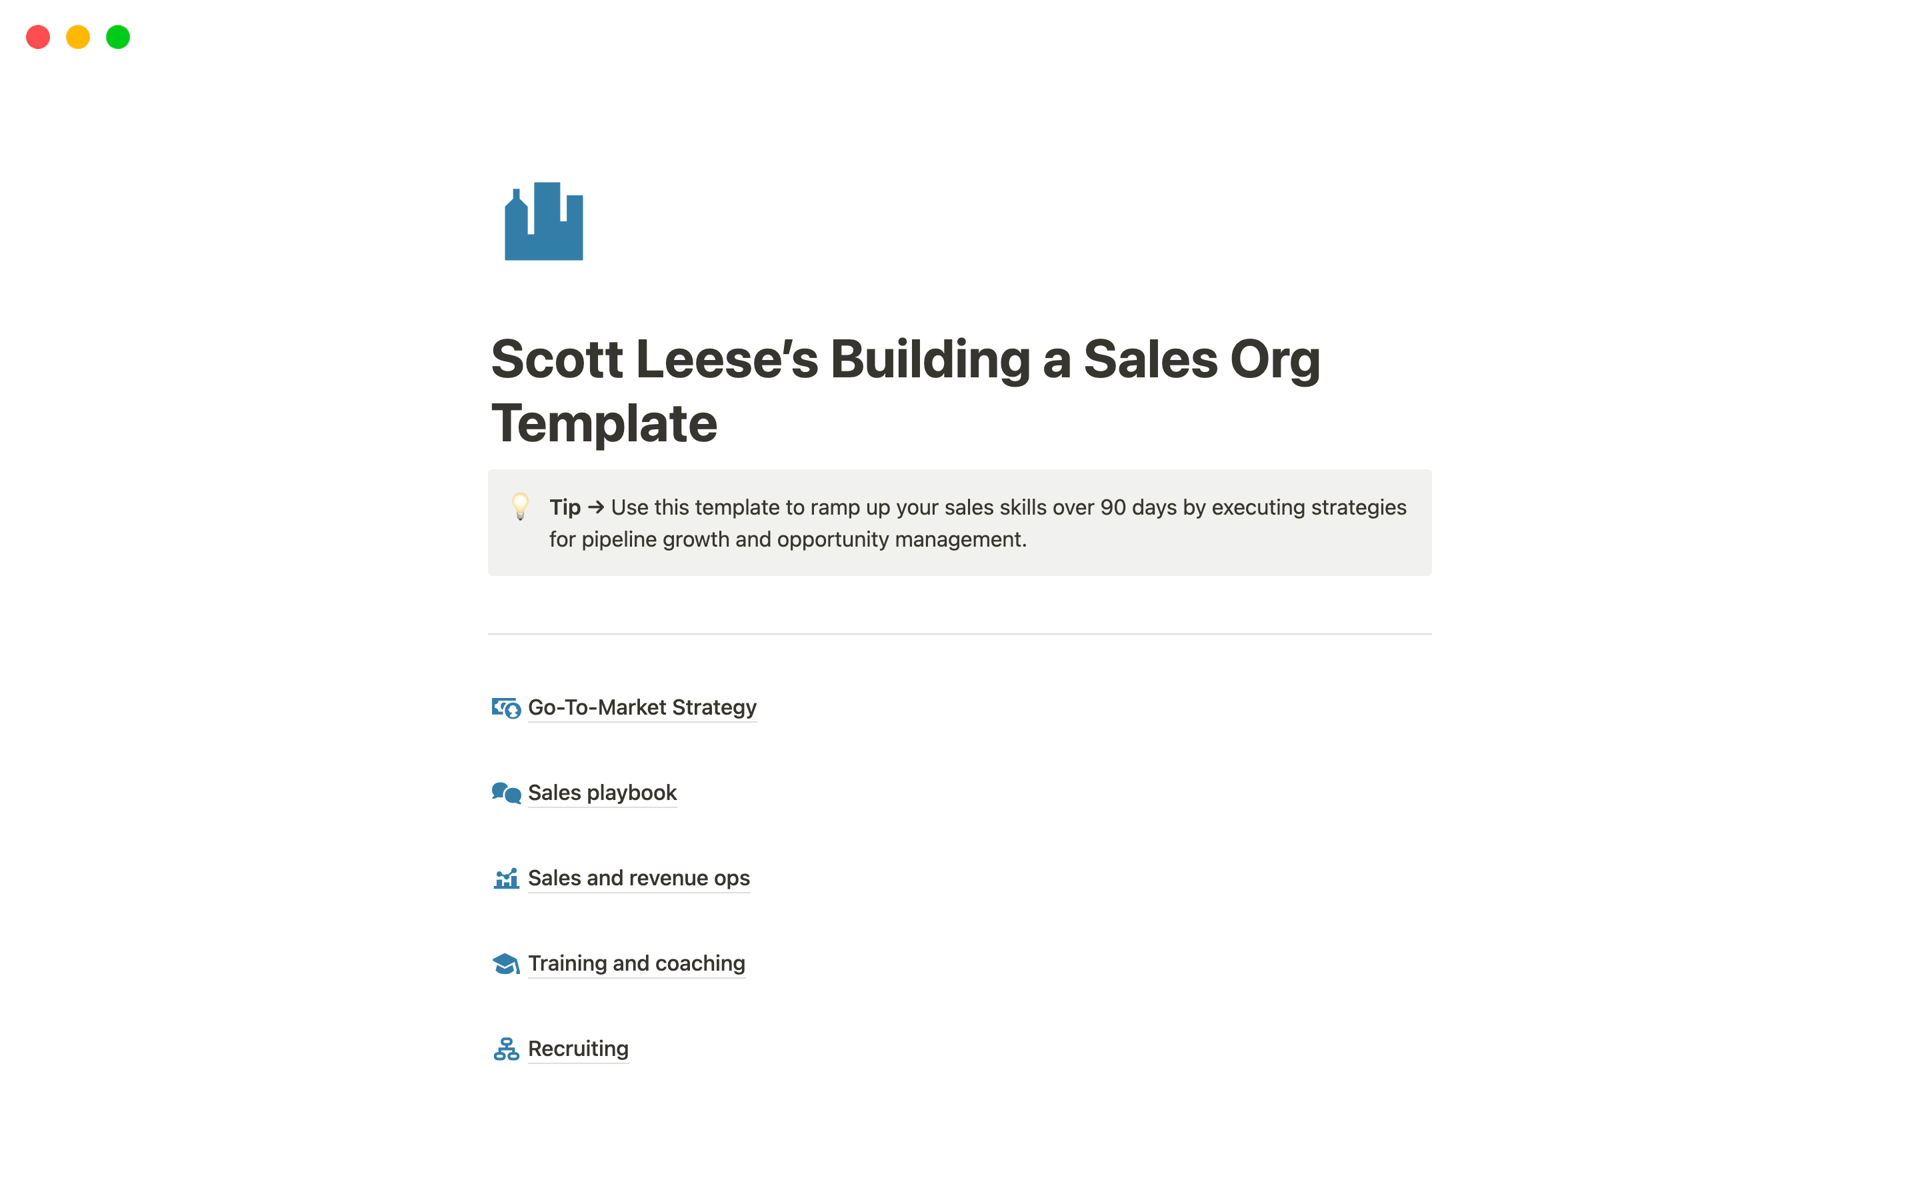 Ramp up your sales skills over 90 days.